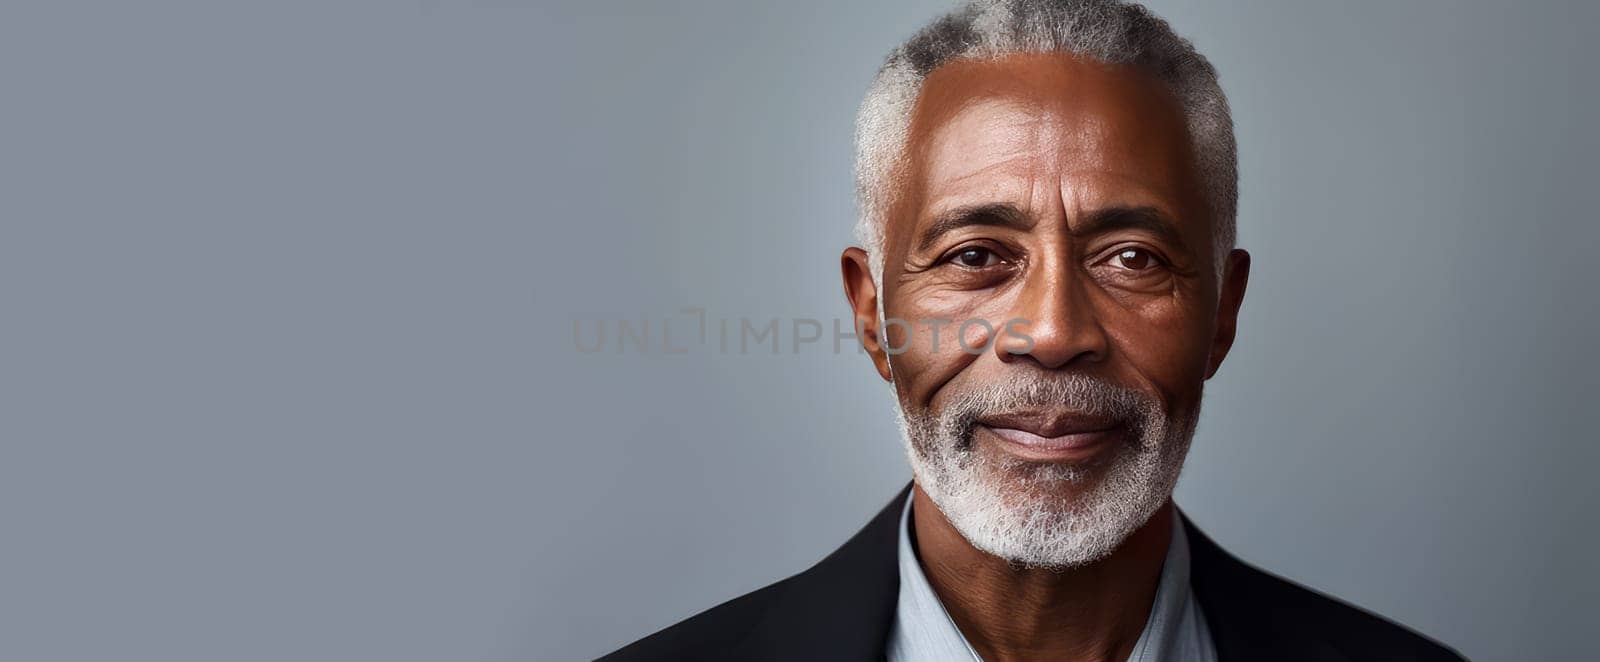 Handsome elegant, elderly African American man, on a gray background, banner, close-up, copy space. Advertising of cosmetic products, spa treatments, shampoos and hair care products, dentistry and medicine, perfumes and cosmetology for senior men.